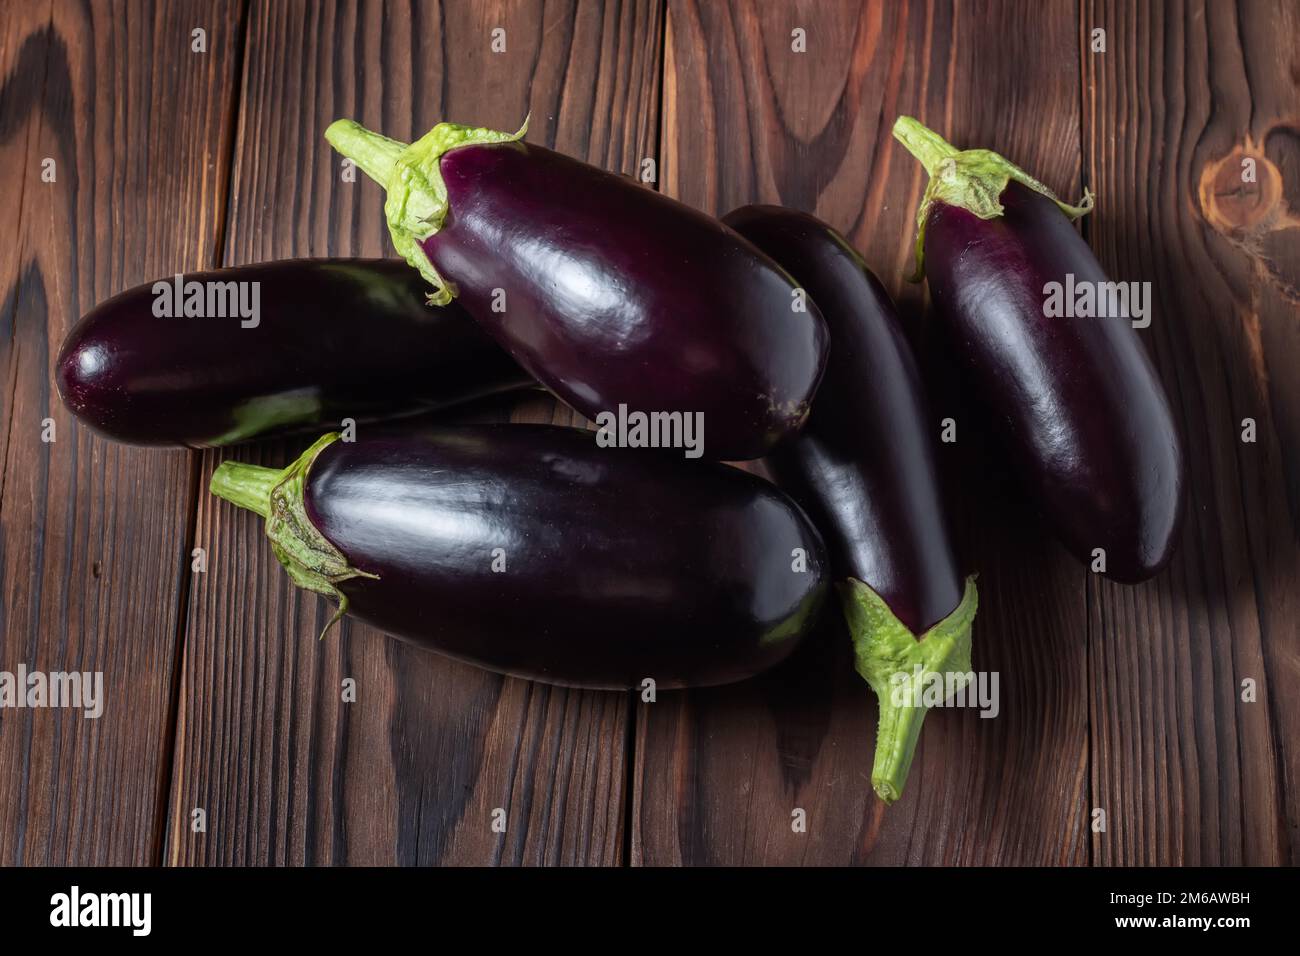 Frsh organic eggplant on the wooden boards. Stock Photo